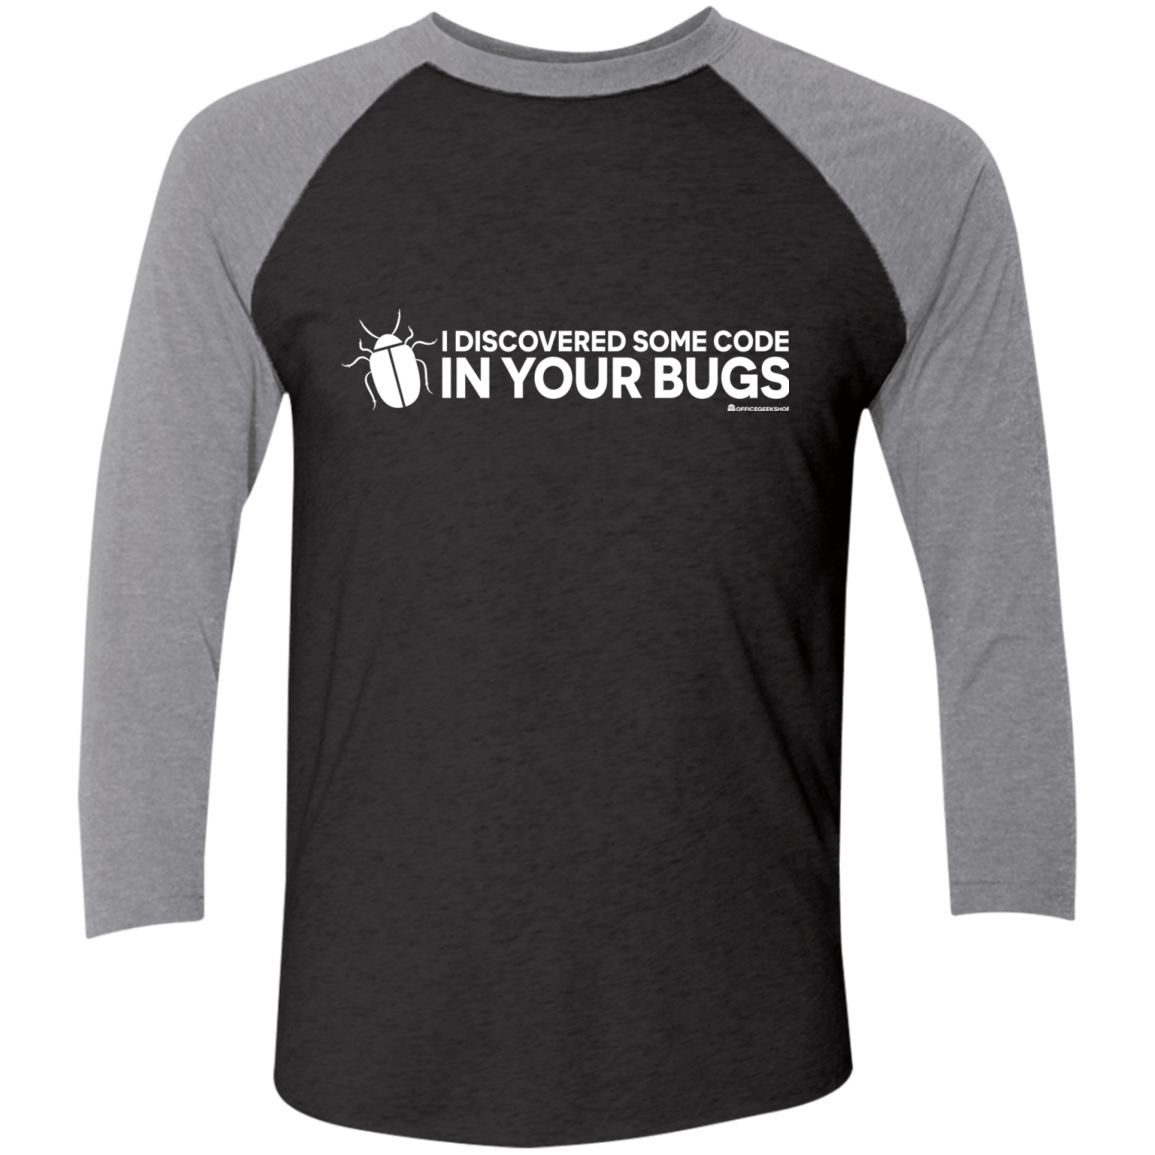 T-Shirts Vintage Black/Premium Heather / X-Small I Discovered Some Code In Your Bugs Men's Triblend 3/4 Sleeve